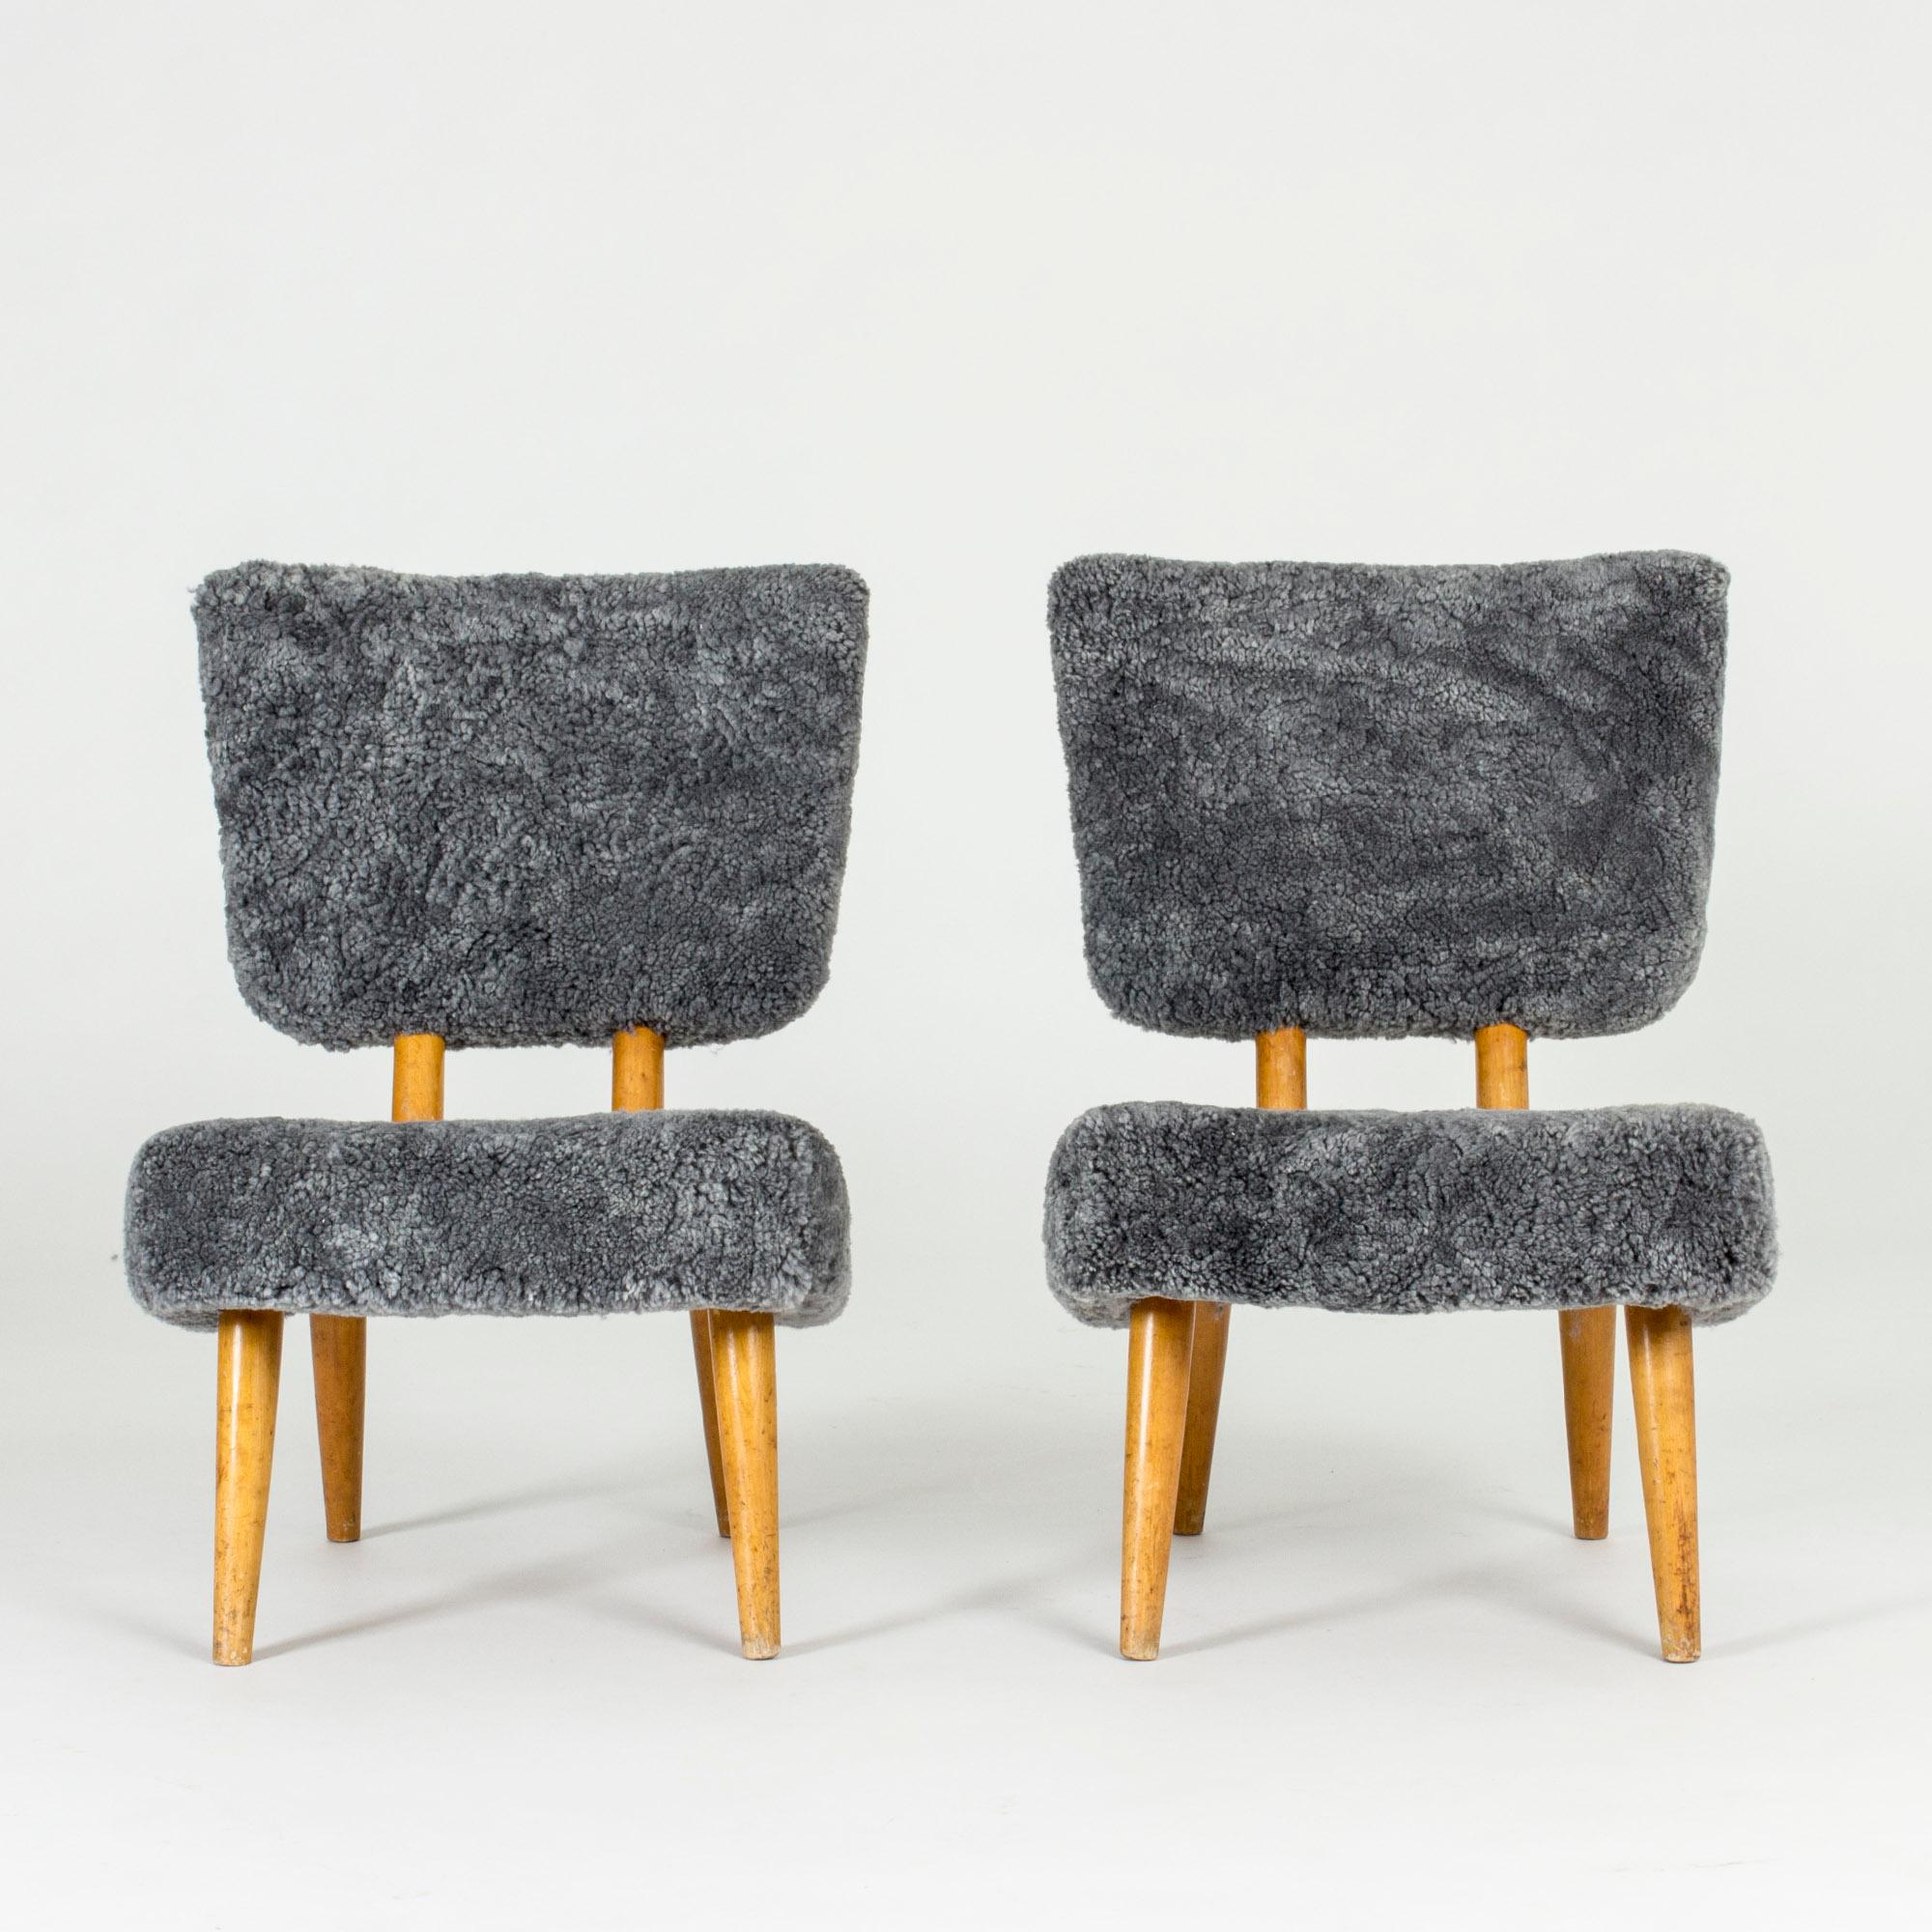 Pair of cheeky lounge chairs, made in Norway in the 1940s. Rare, neat model with high comfort and a light look. Reupholstered with sheepskin.